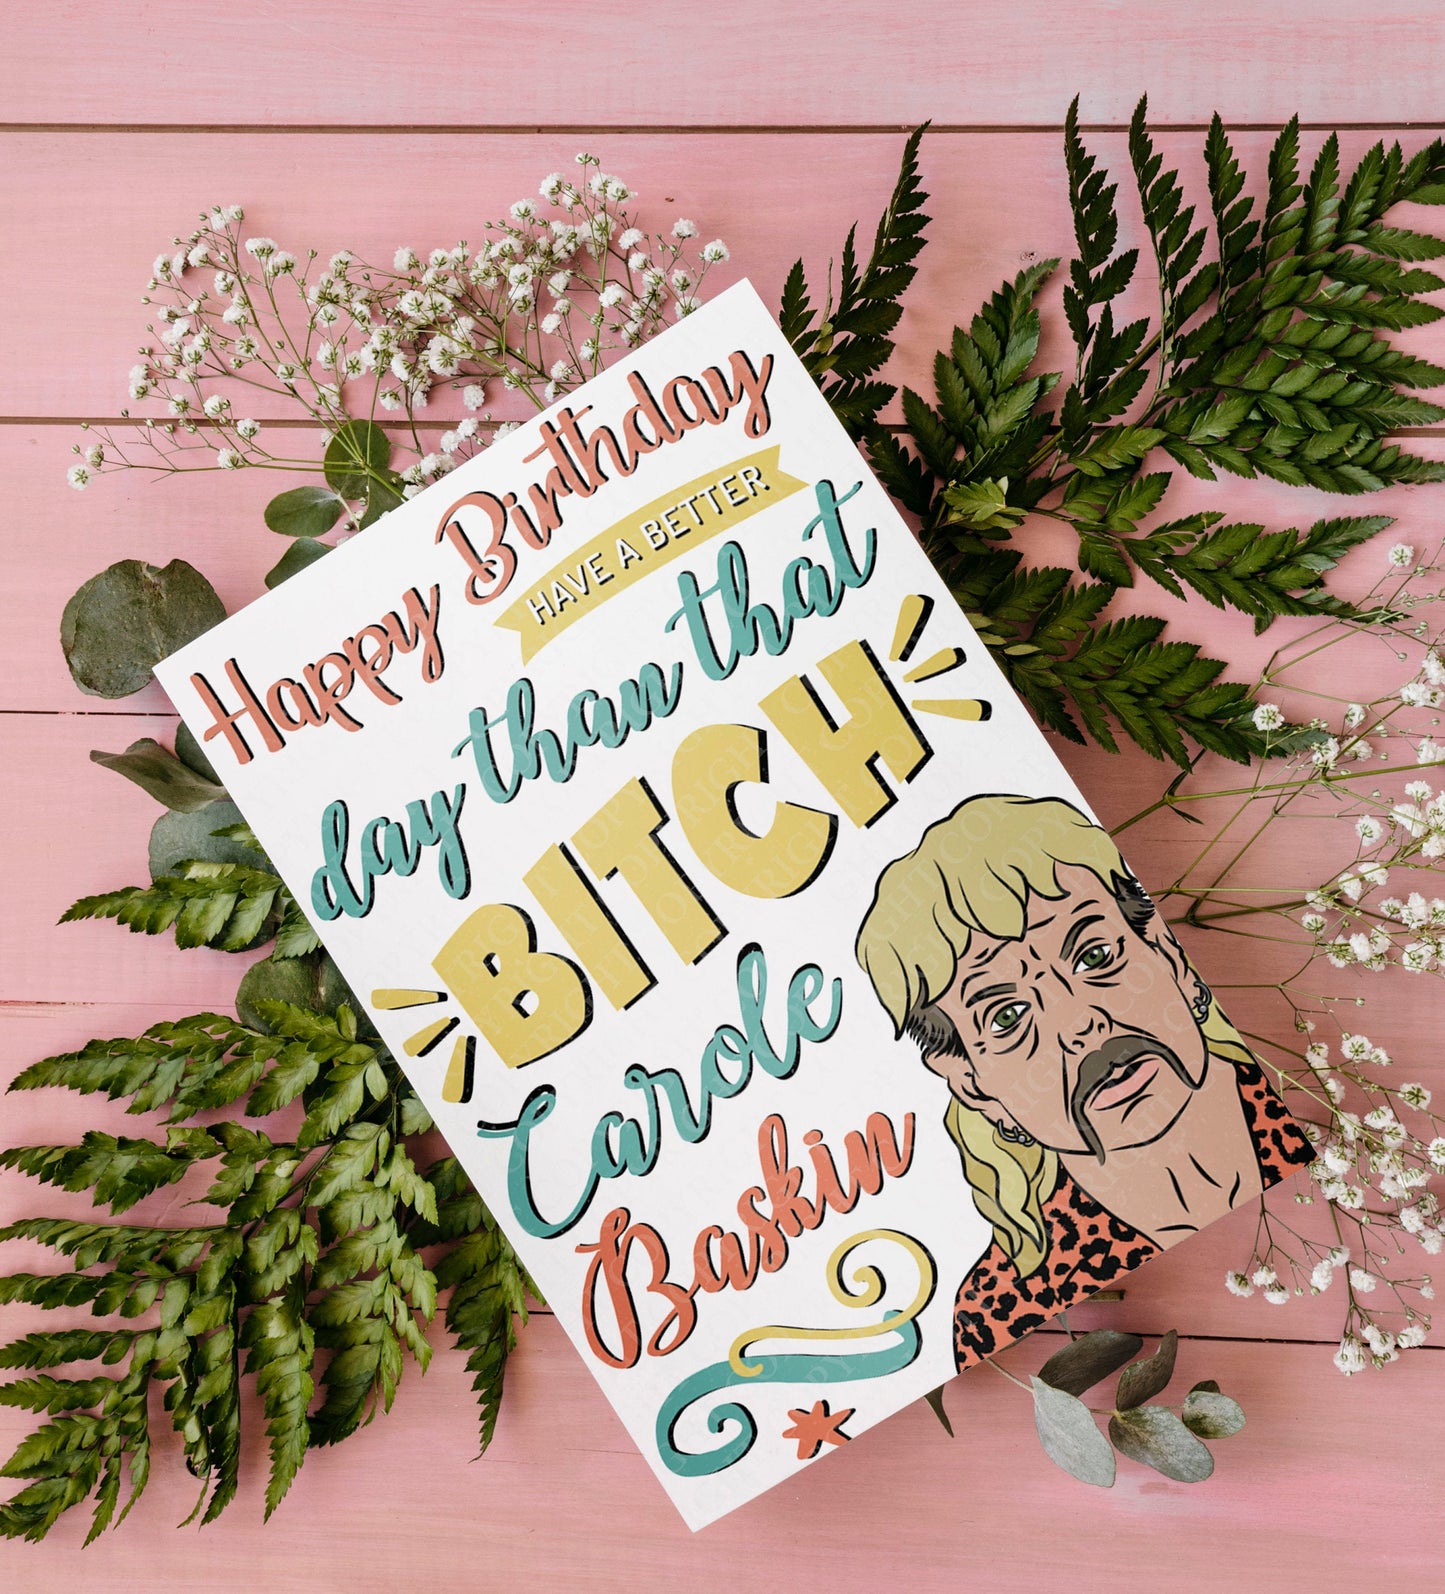 Happy birthday have a better day than that bitch | Instant Digital Download JPG